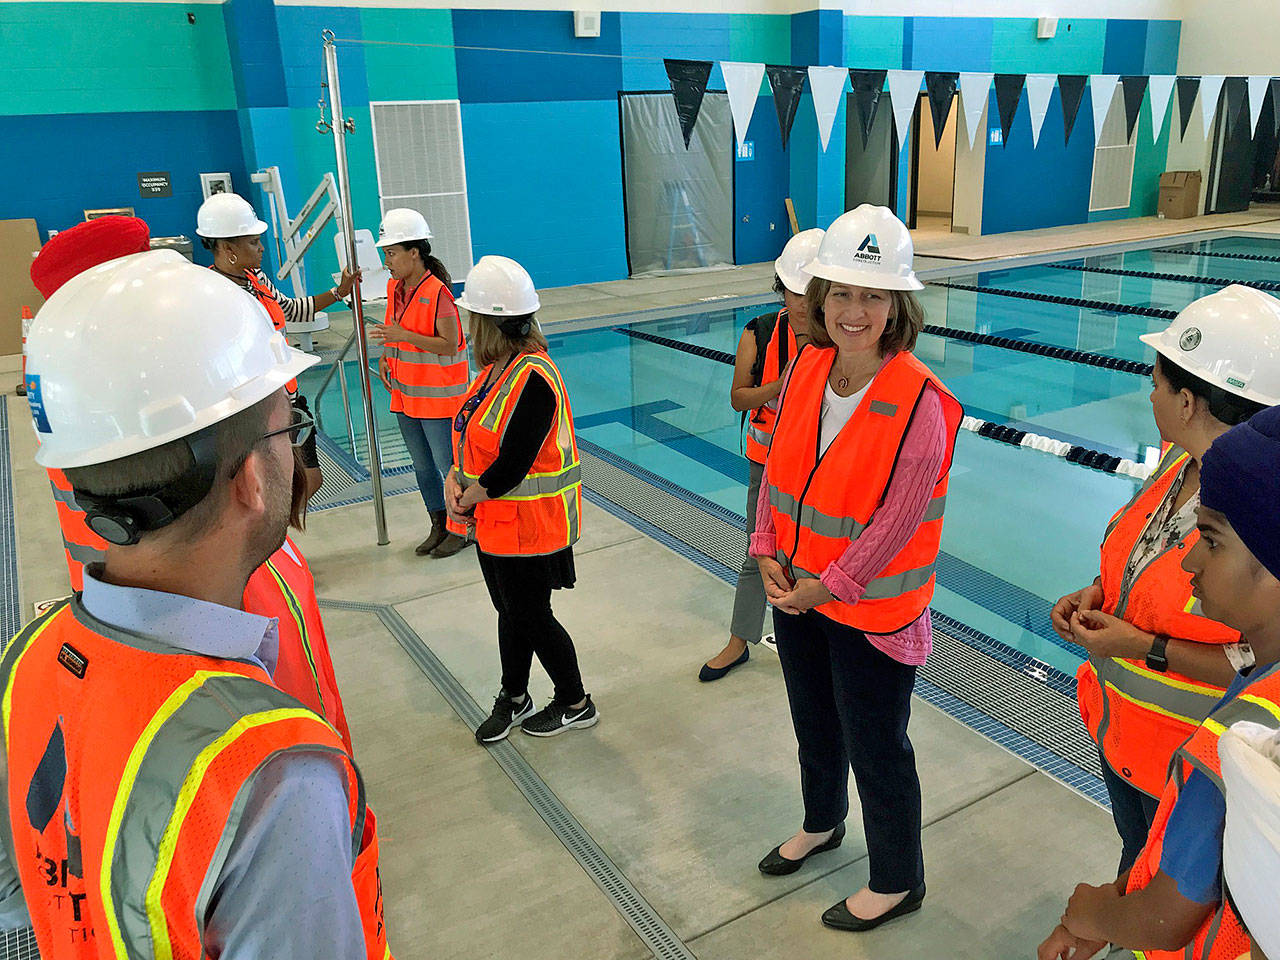 U.S. Rep. Kim Schrier, D-Issaquah, stands near the YMCA pool in Kent during a recent tour. MARK KLAAS, Kent Reporter